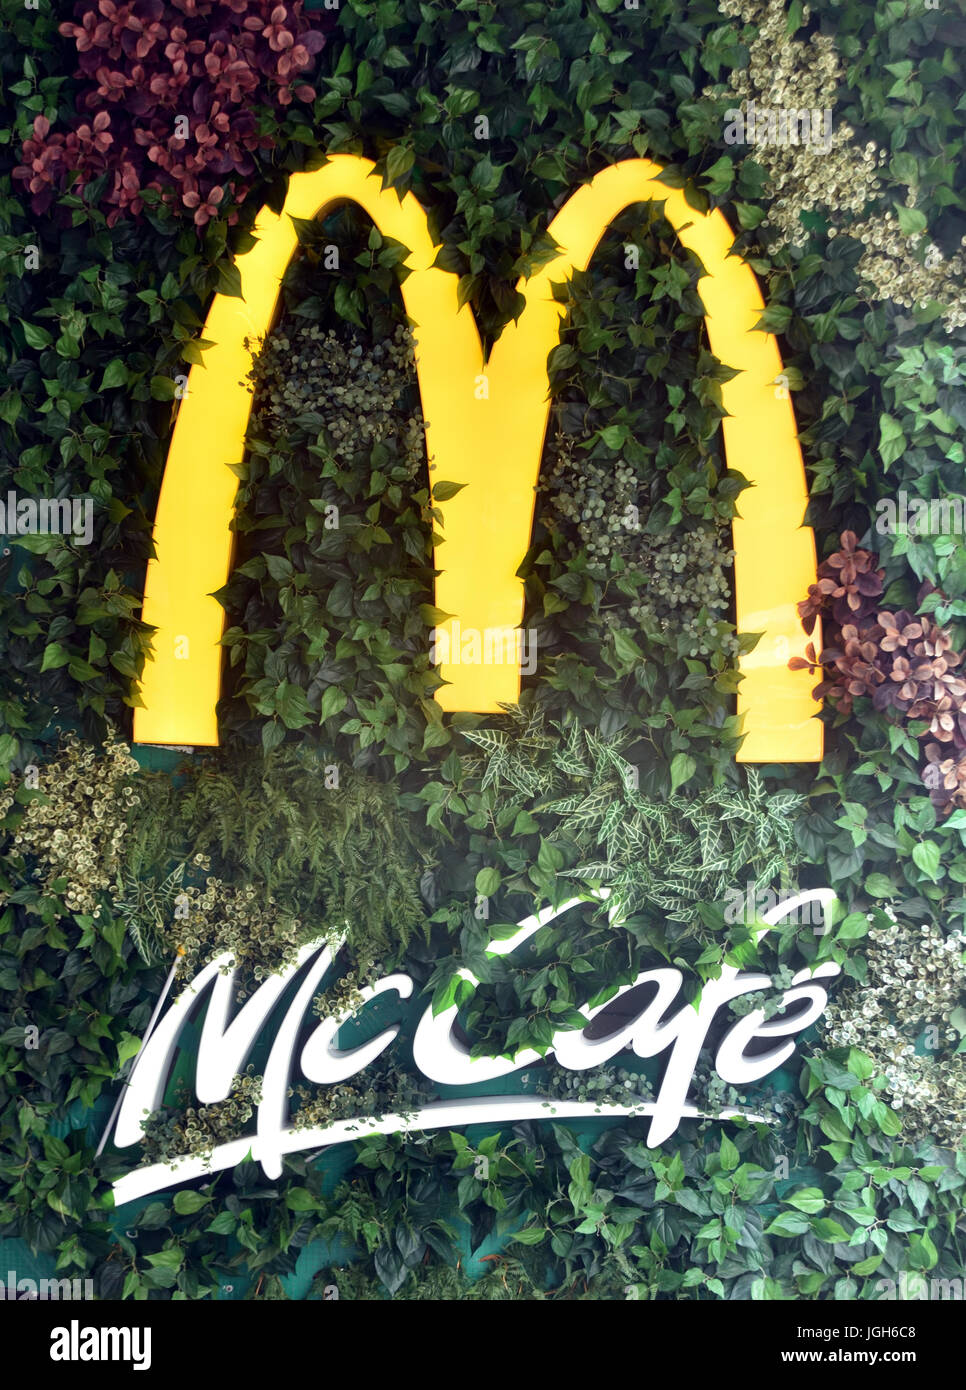 logos of McDonald's and McCafe in green mural Stock Photo